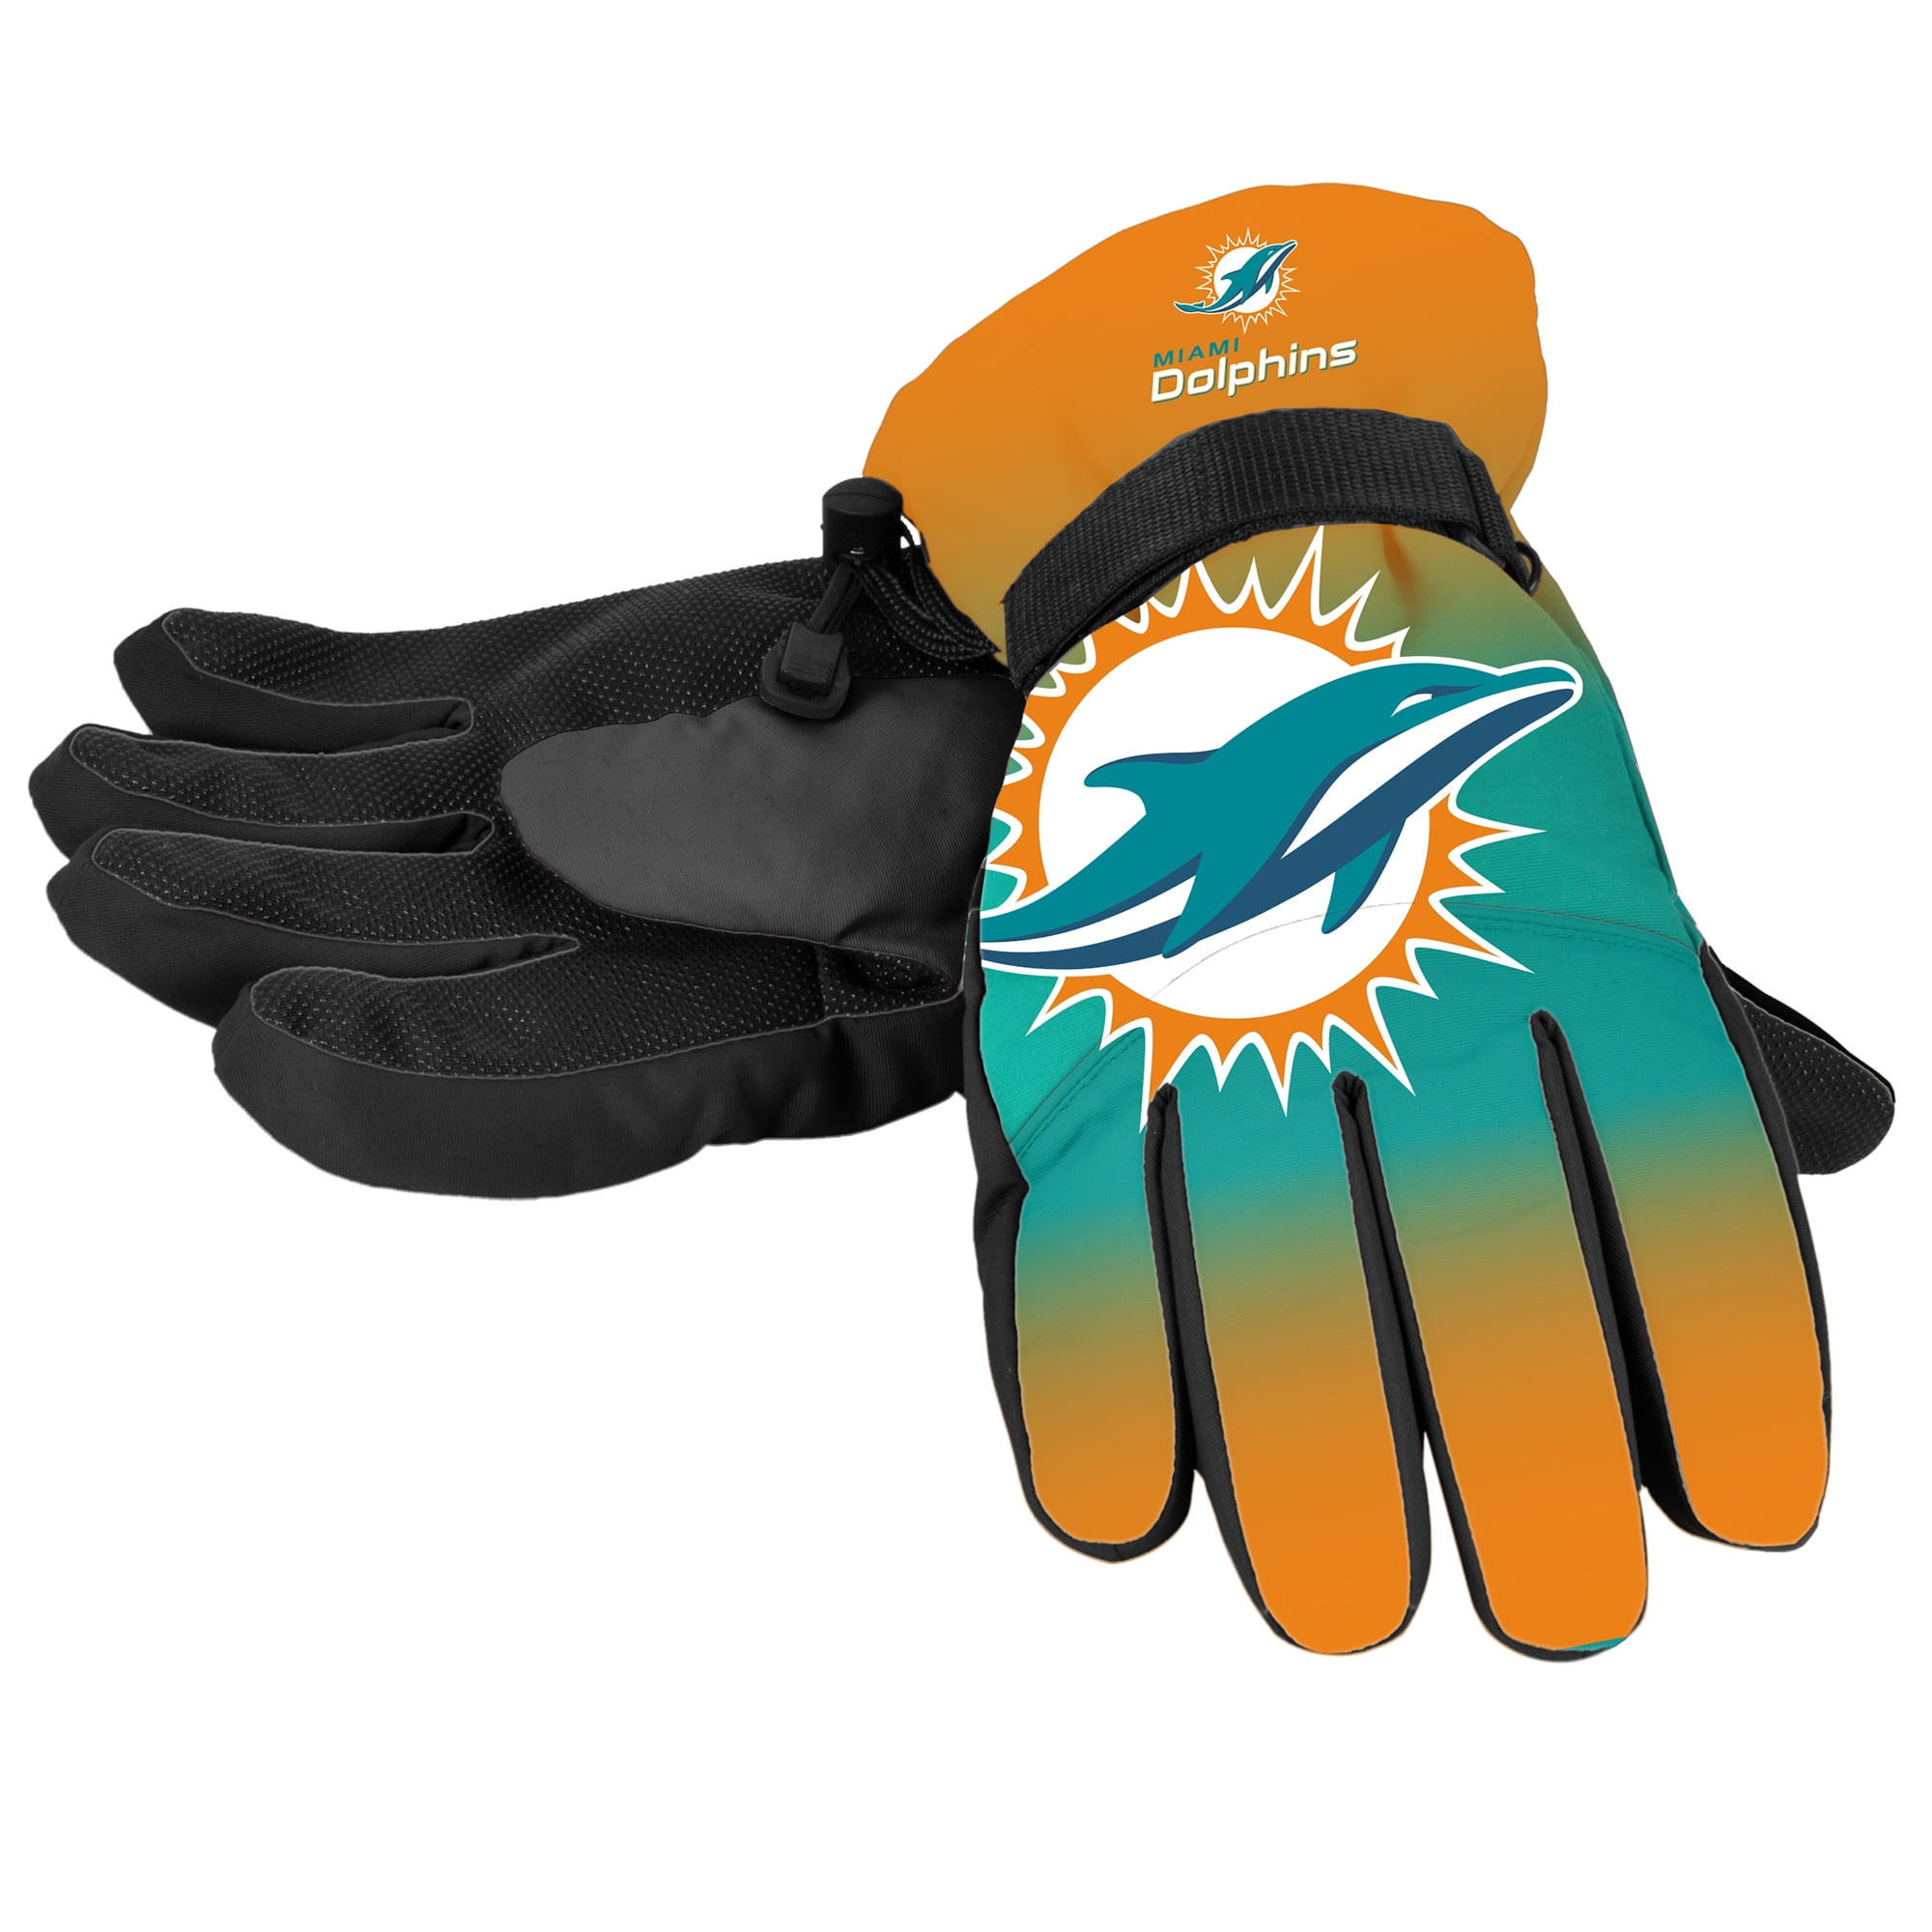 dolphins receiver gloves